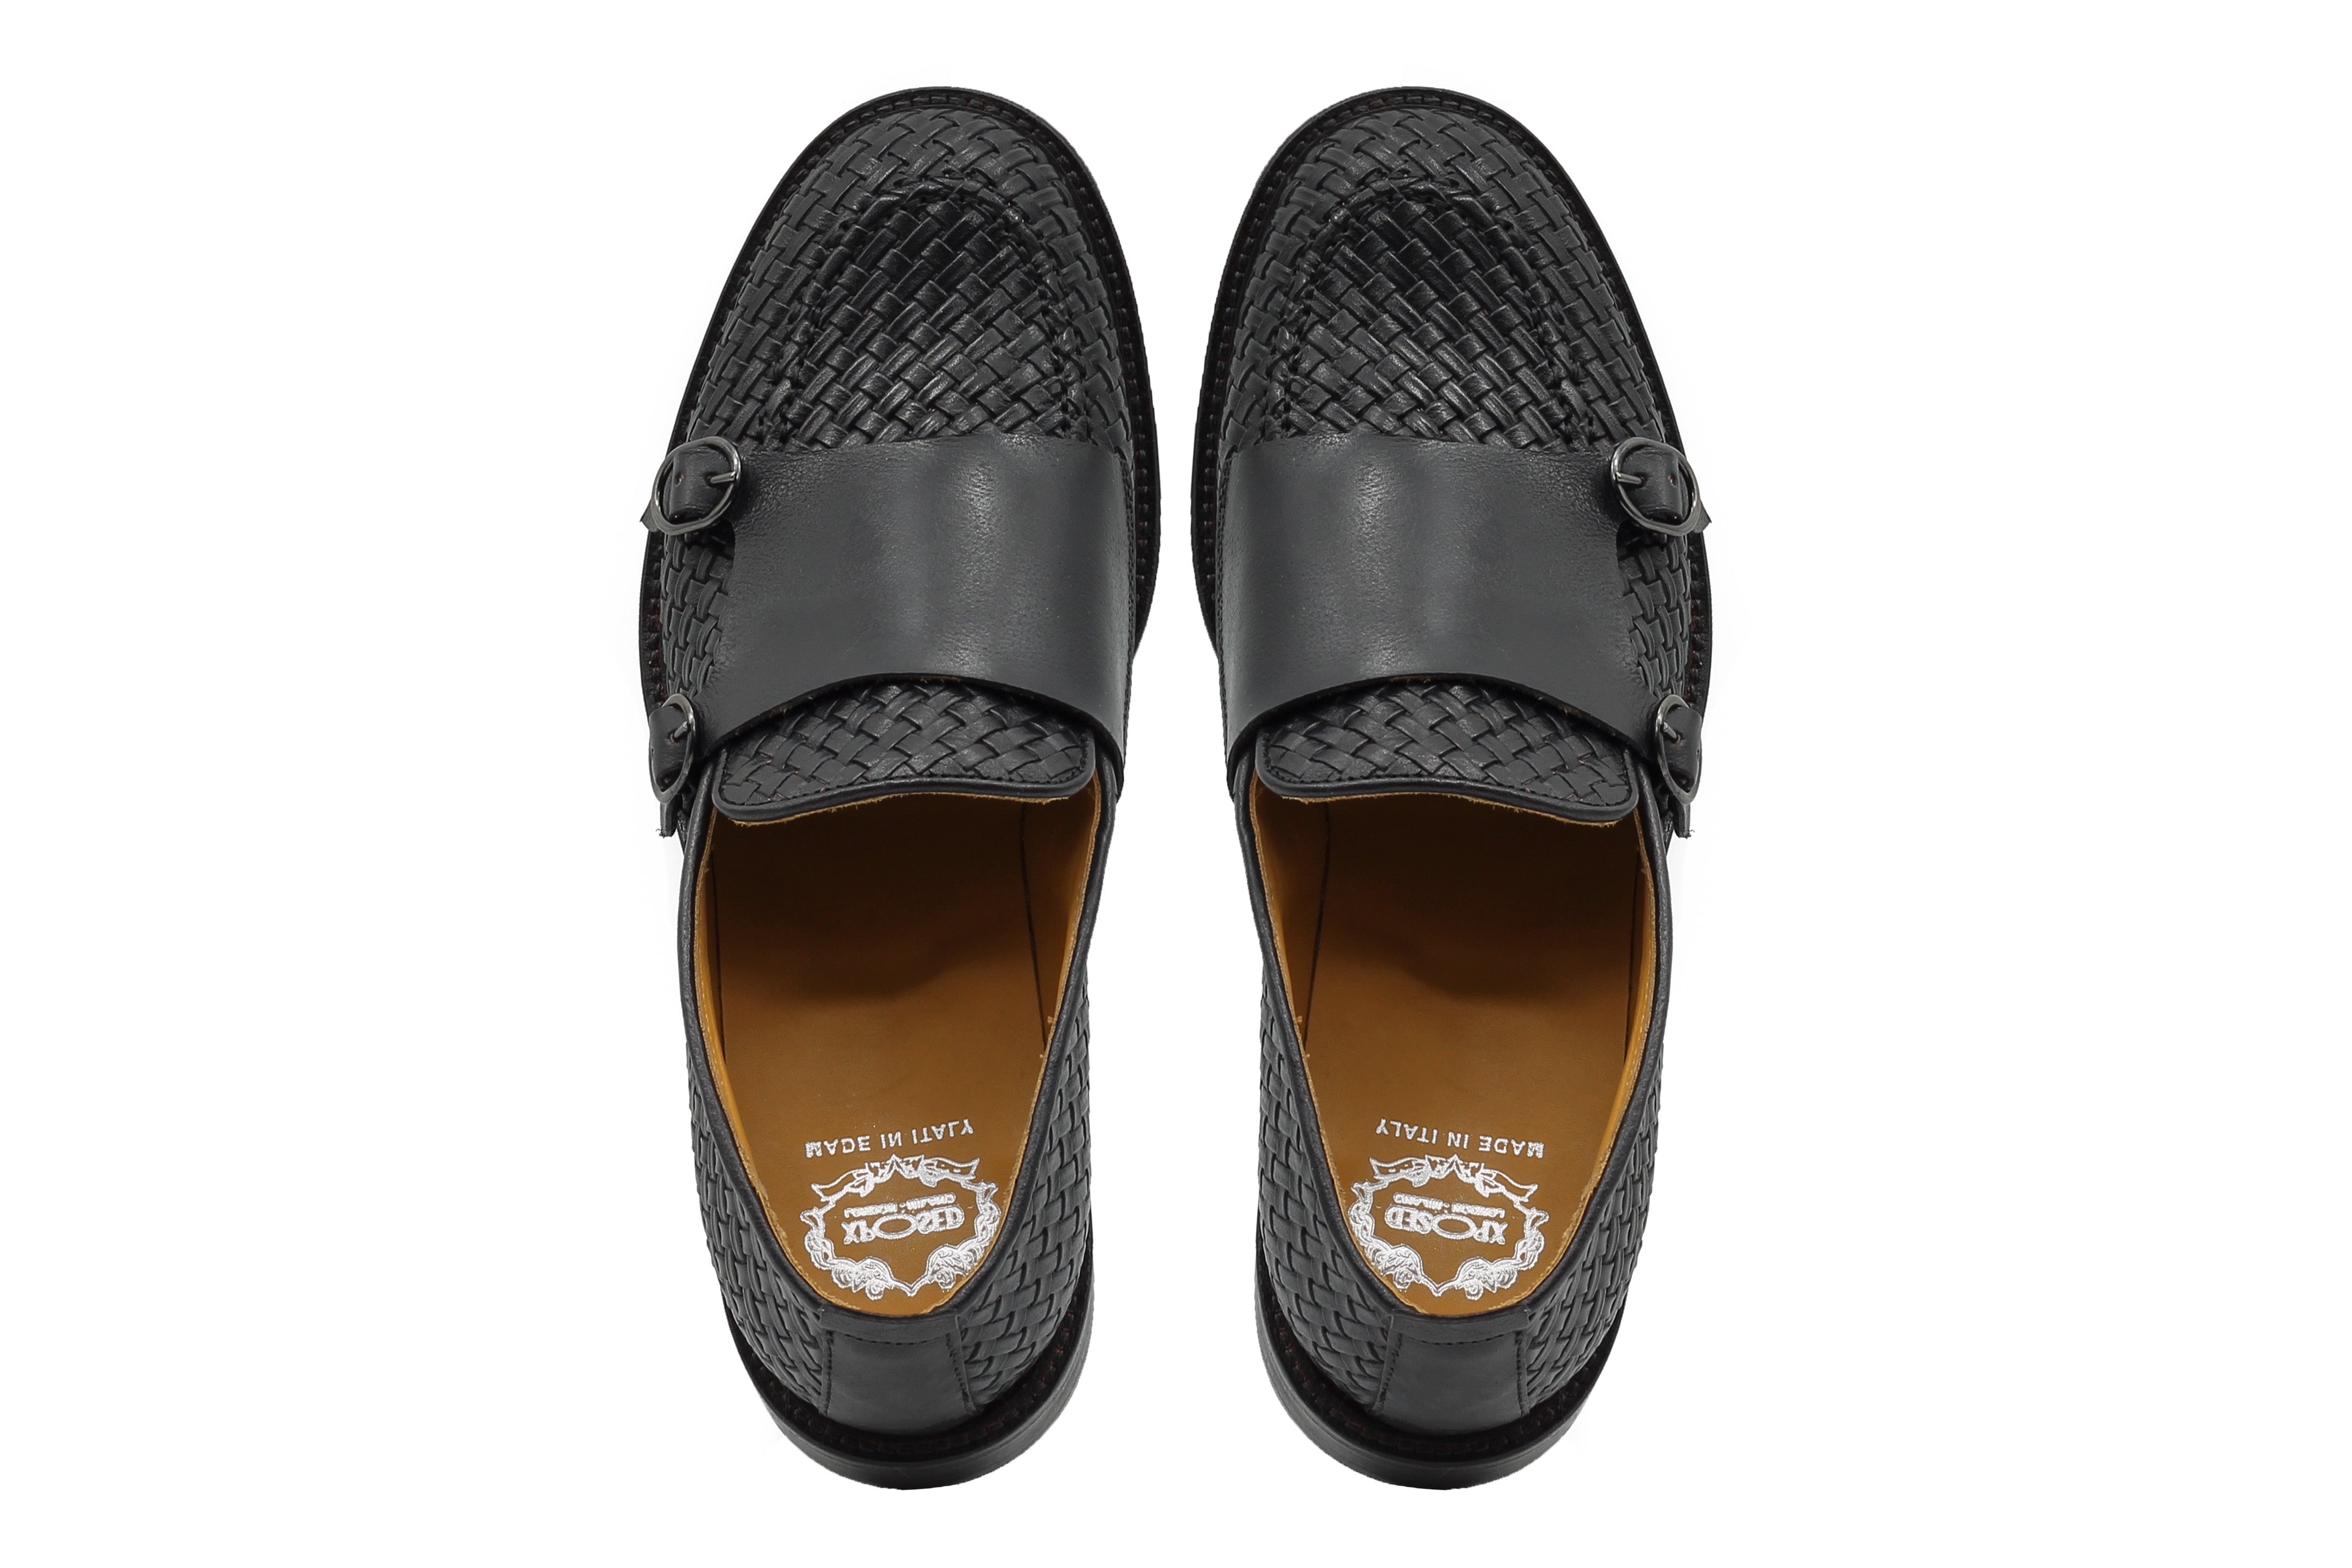 FLORENCE 2 - DOUBLE BUCKLE MONK LOAFER IN BLACK INTERWEAVE ITALIAN LEATHER